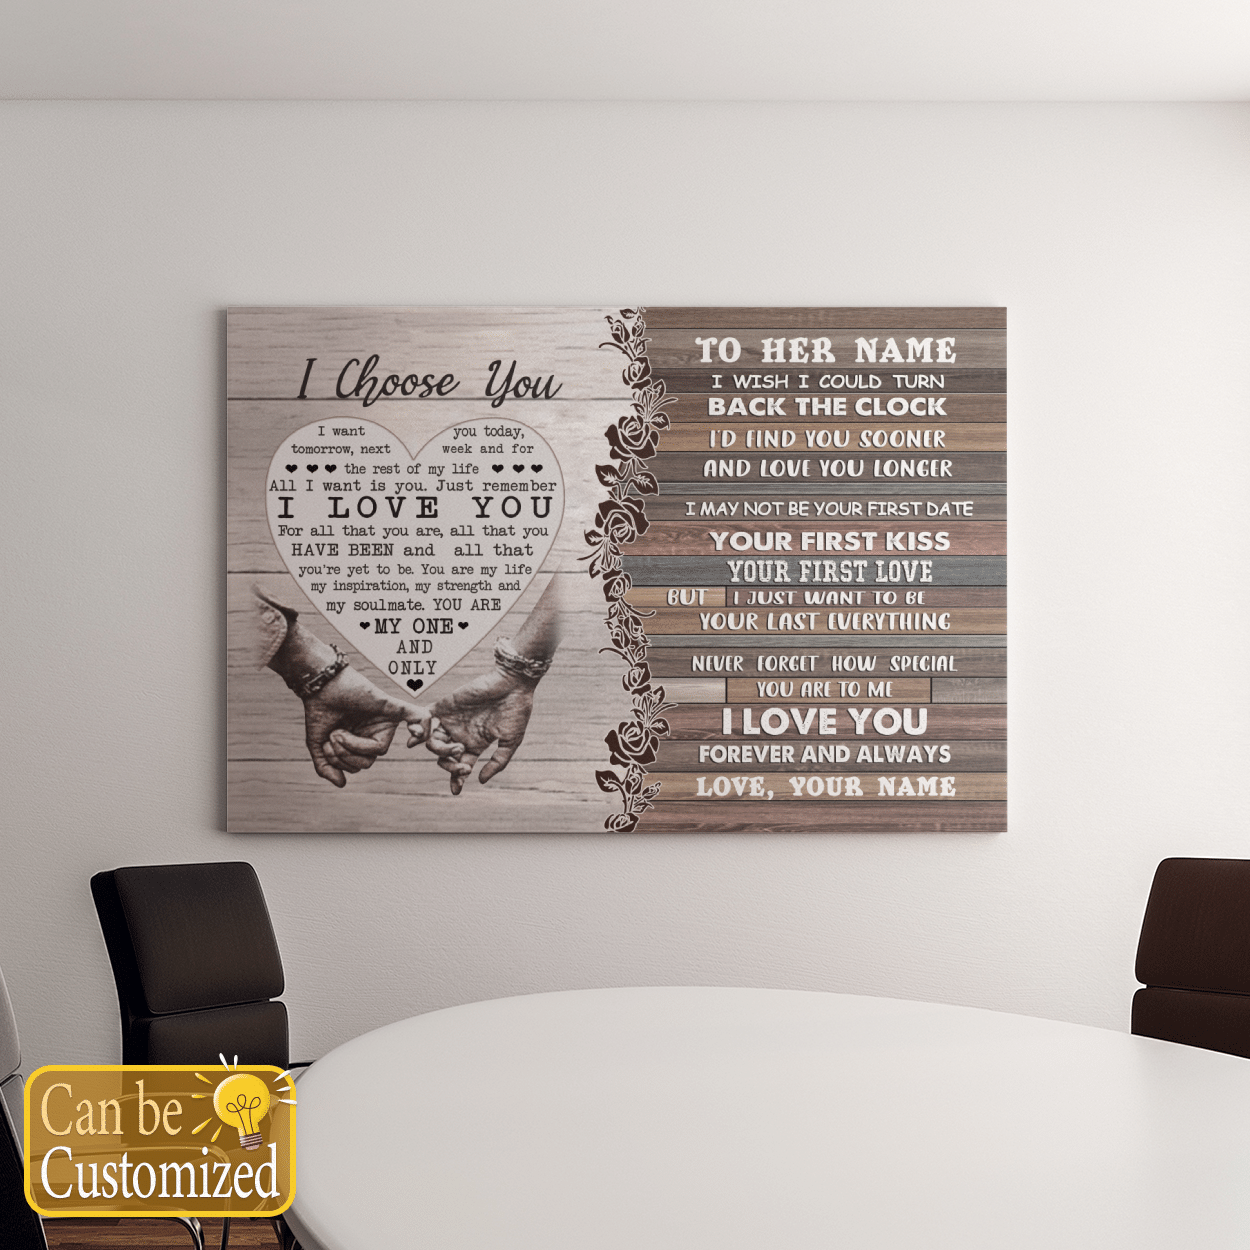 I CHOOSE YOU GREAT GIFT FOR WIFE BACK THE CLOCK POSTER